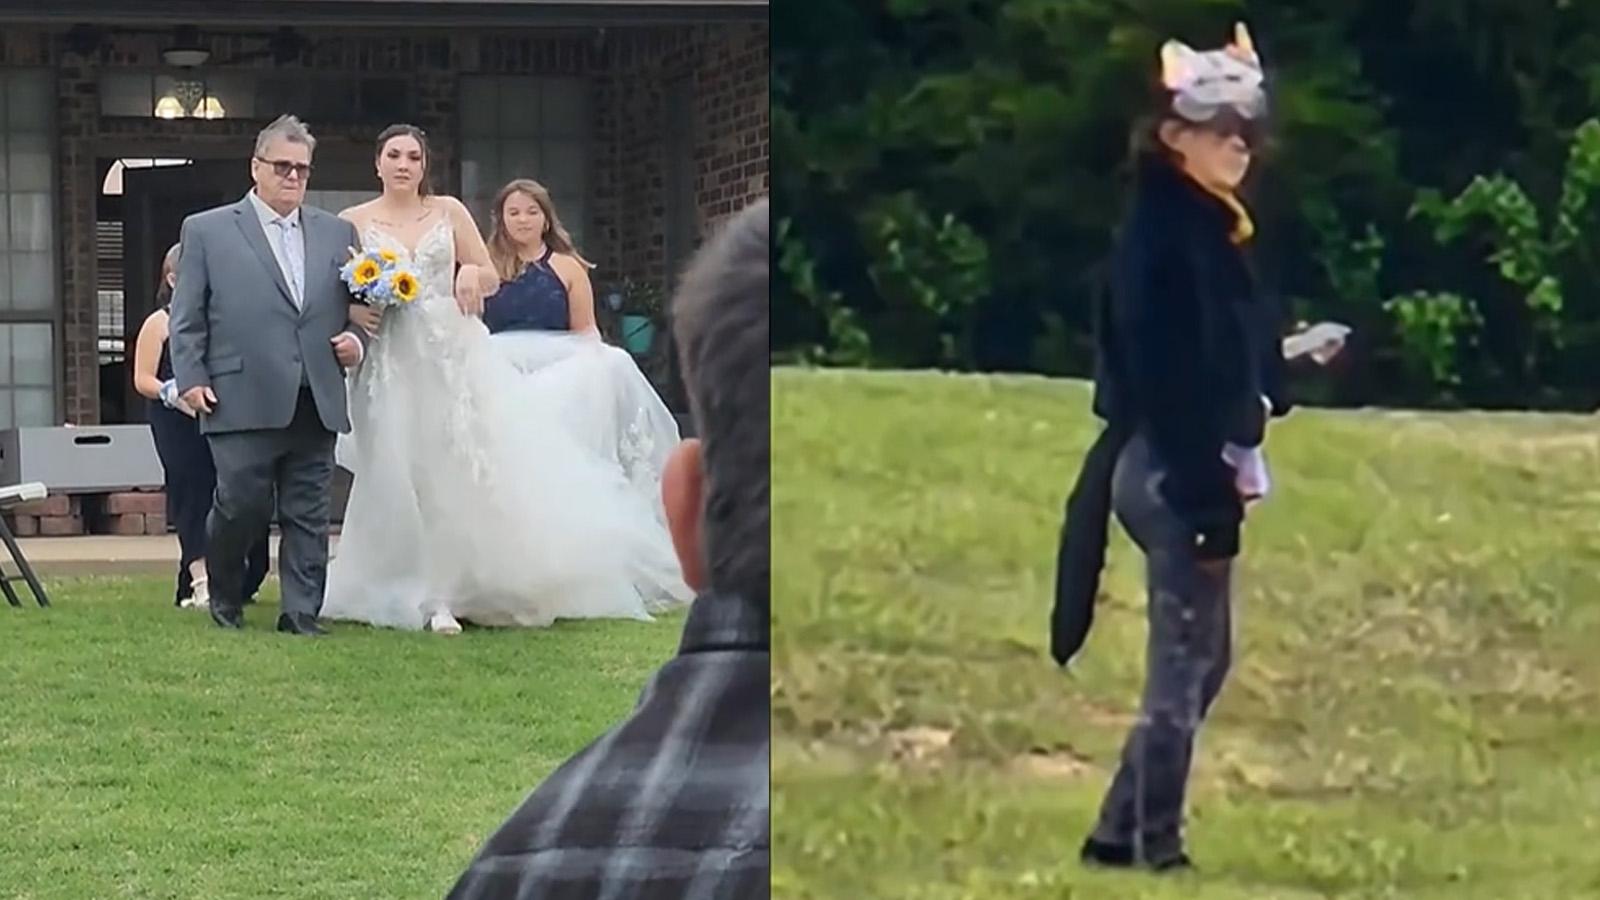 wedding crashed by guy in cat suit